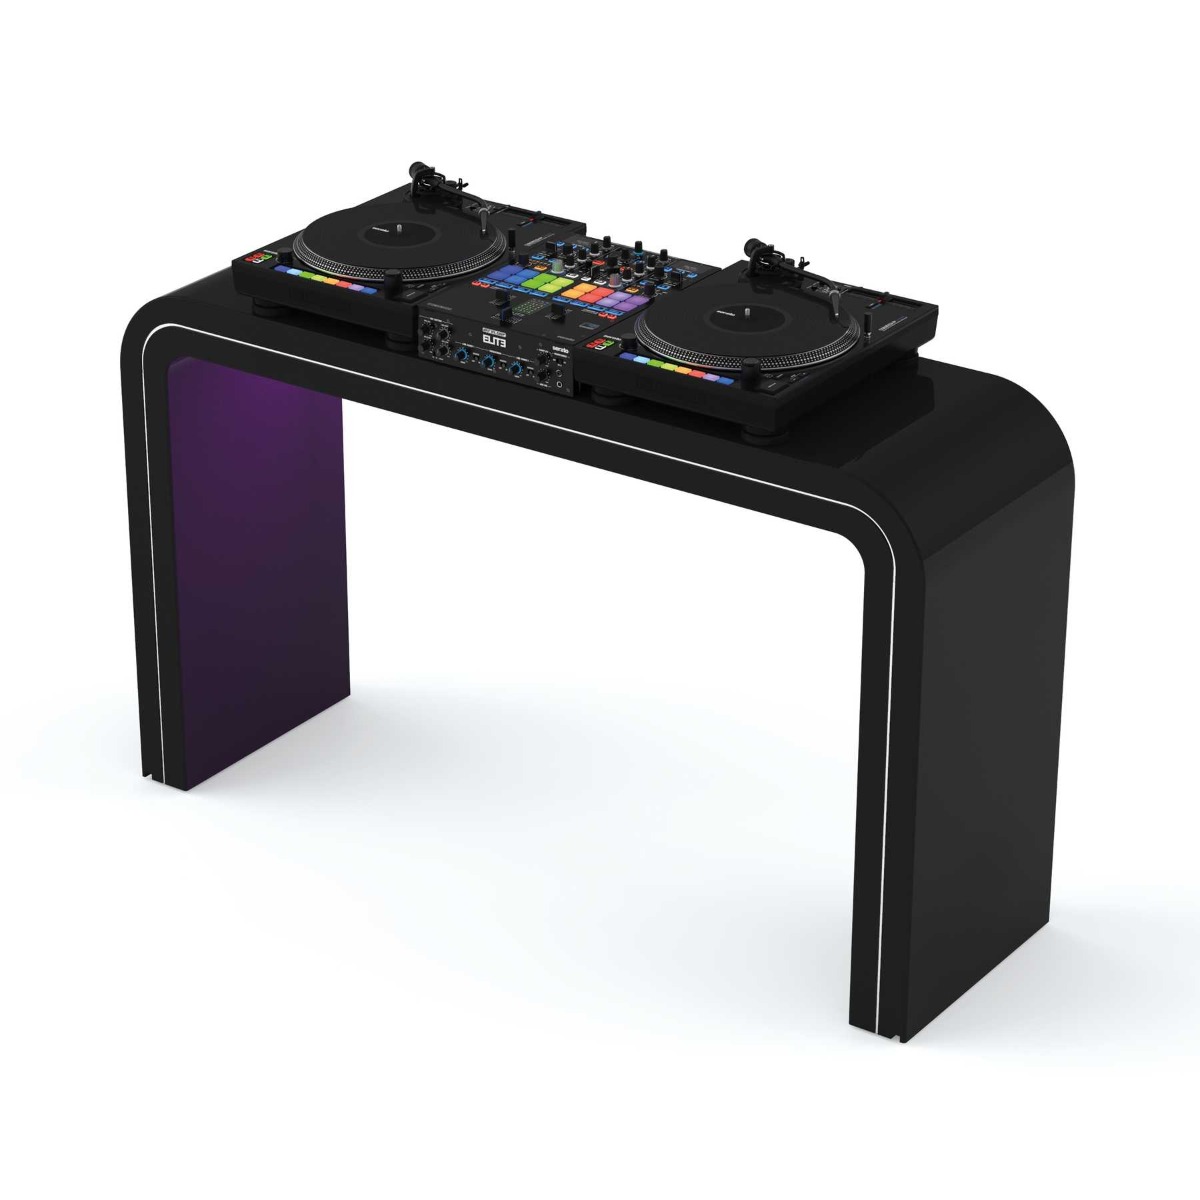 Glorious Session Cube Xl Furniture For Djs Producers And Vinyl